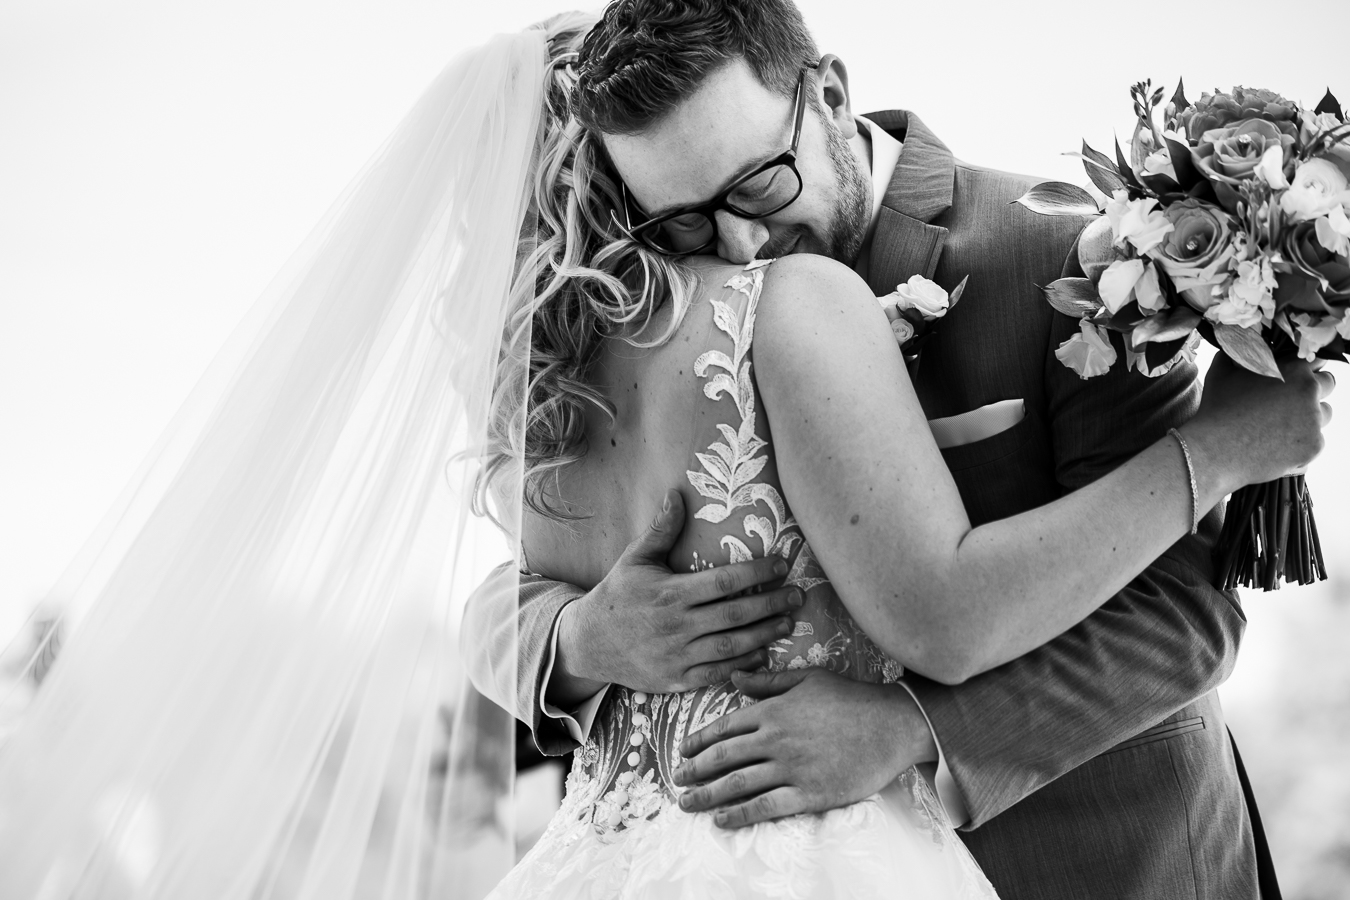 creative NJ Wedding Photographer, lisa rhinehart, captures this authentic black and white moment between the couple during their first look as they hug one another before their palace at somerset park wedding 